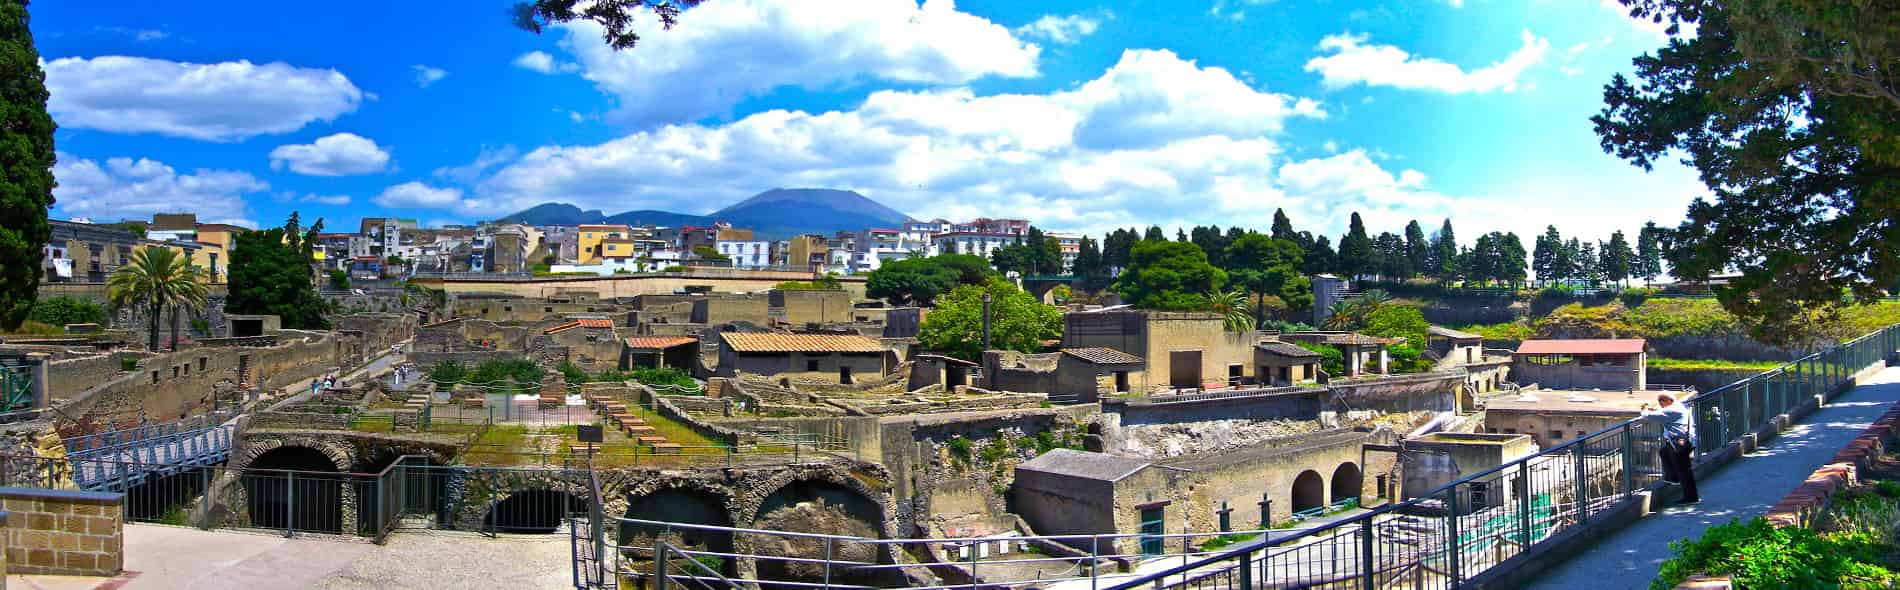 The walking tour and guided tour of the Archaeological Excavations of Herculaneum shows the beauty of a Roman city that has remained almost intact for over two thousand years